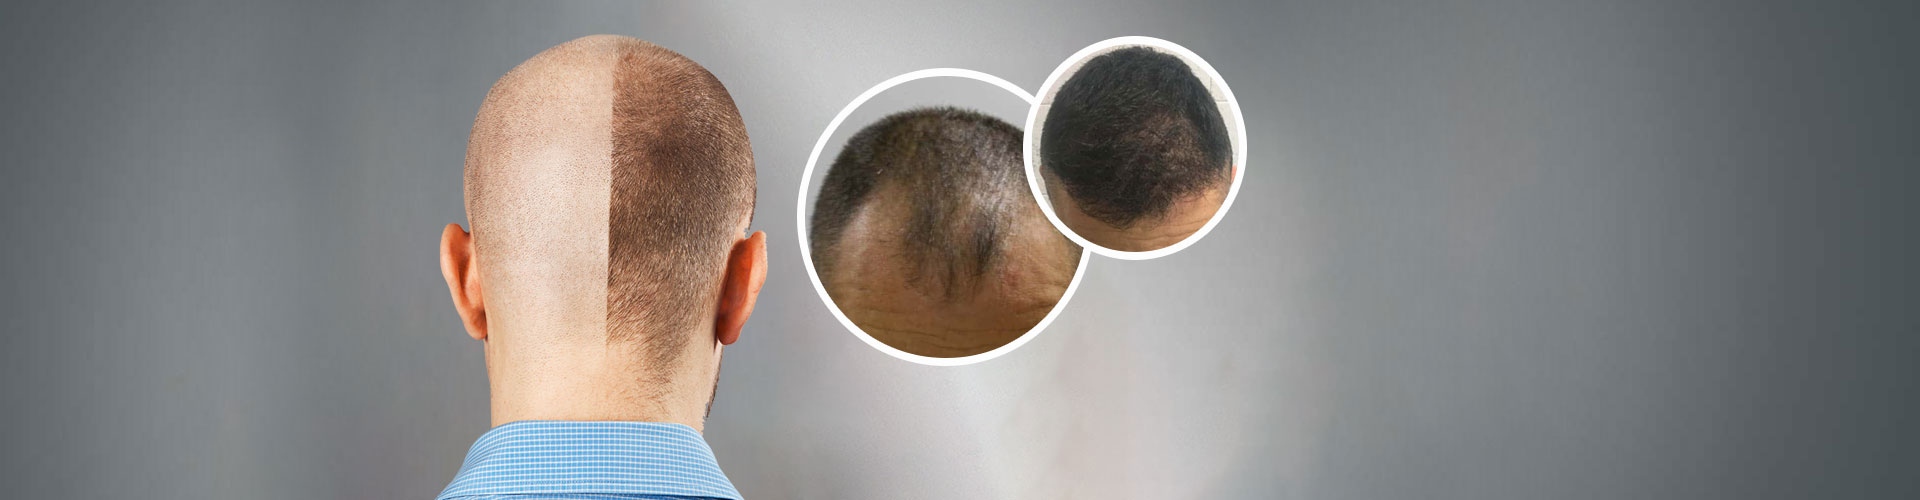 FUE Hair Transplant in Ambala Cantt